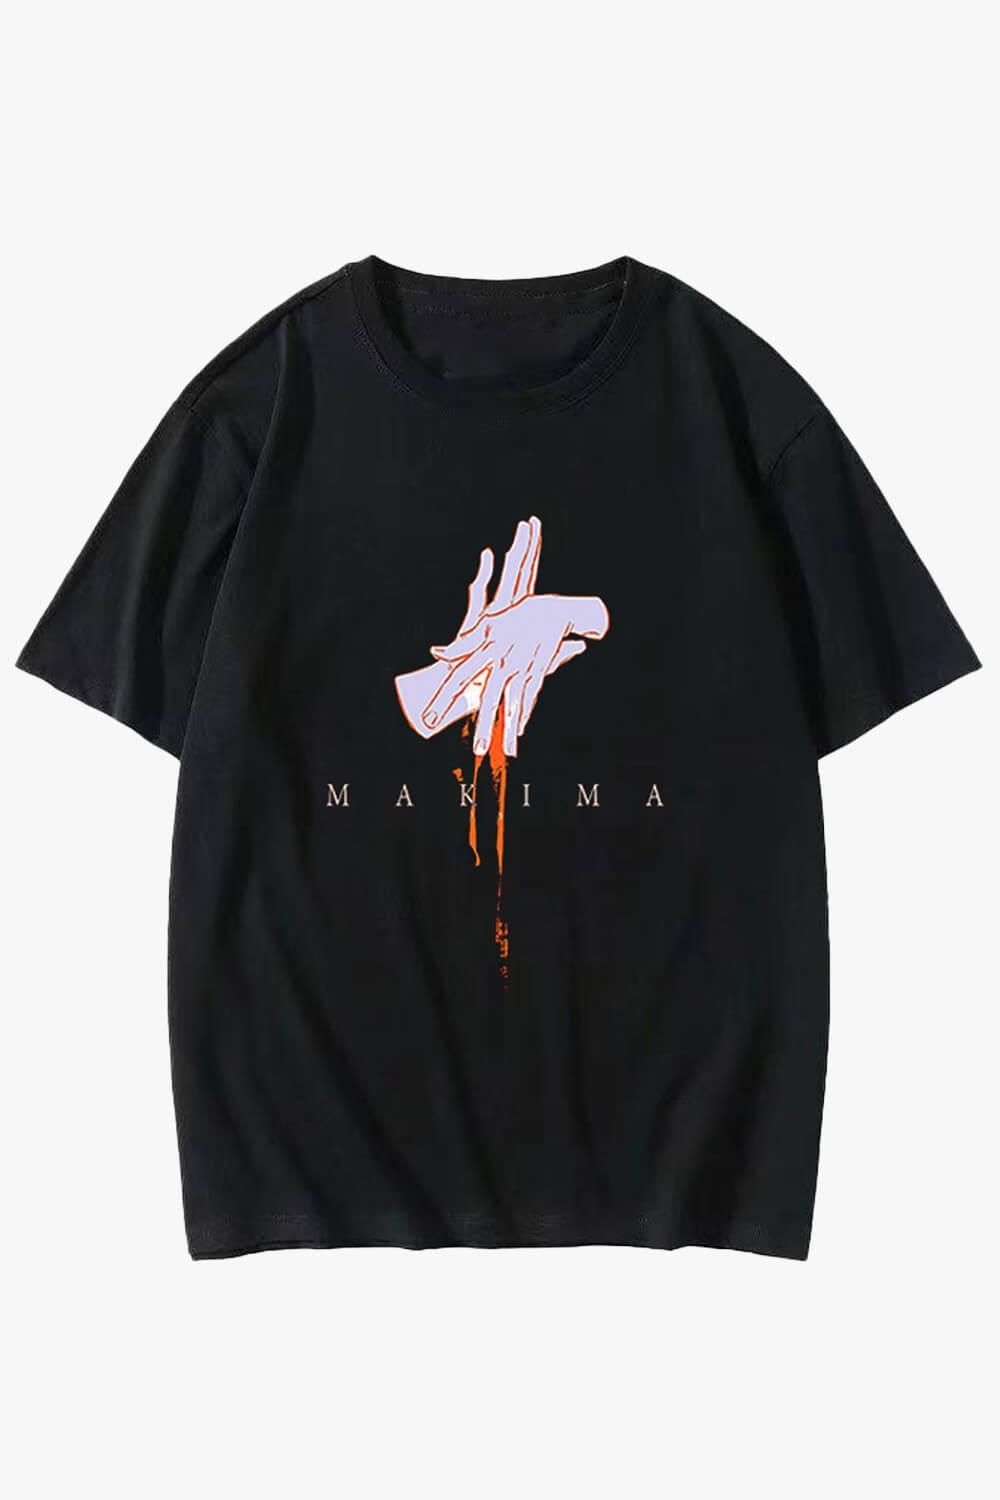 Chainsaw Man Makima Hands Sign T-Shirt - Aesthetic Clothes Shop